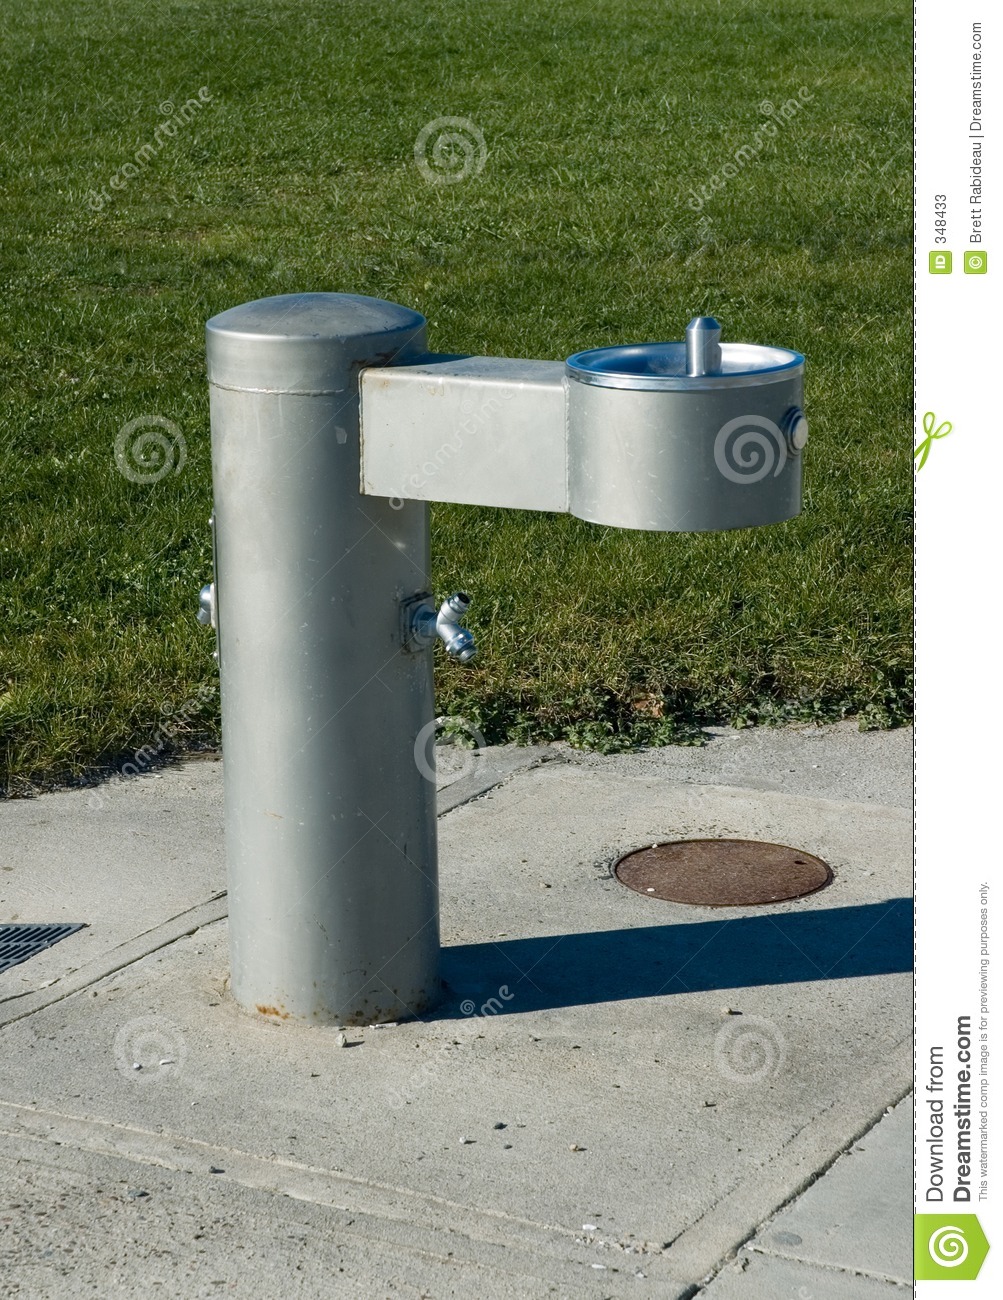 Drinking Fountain In Park Installed In A Sidewalk On The Edge Of The